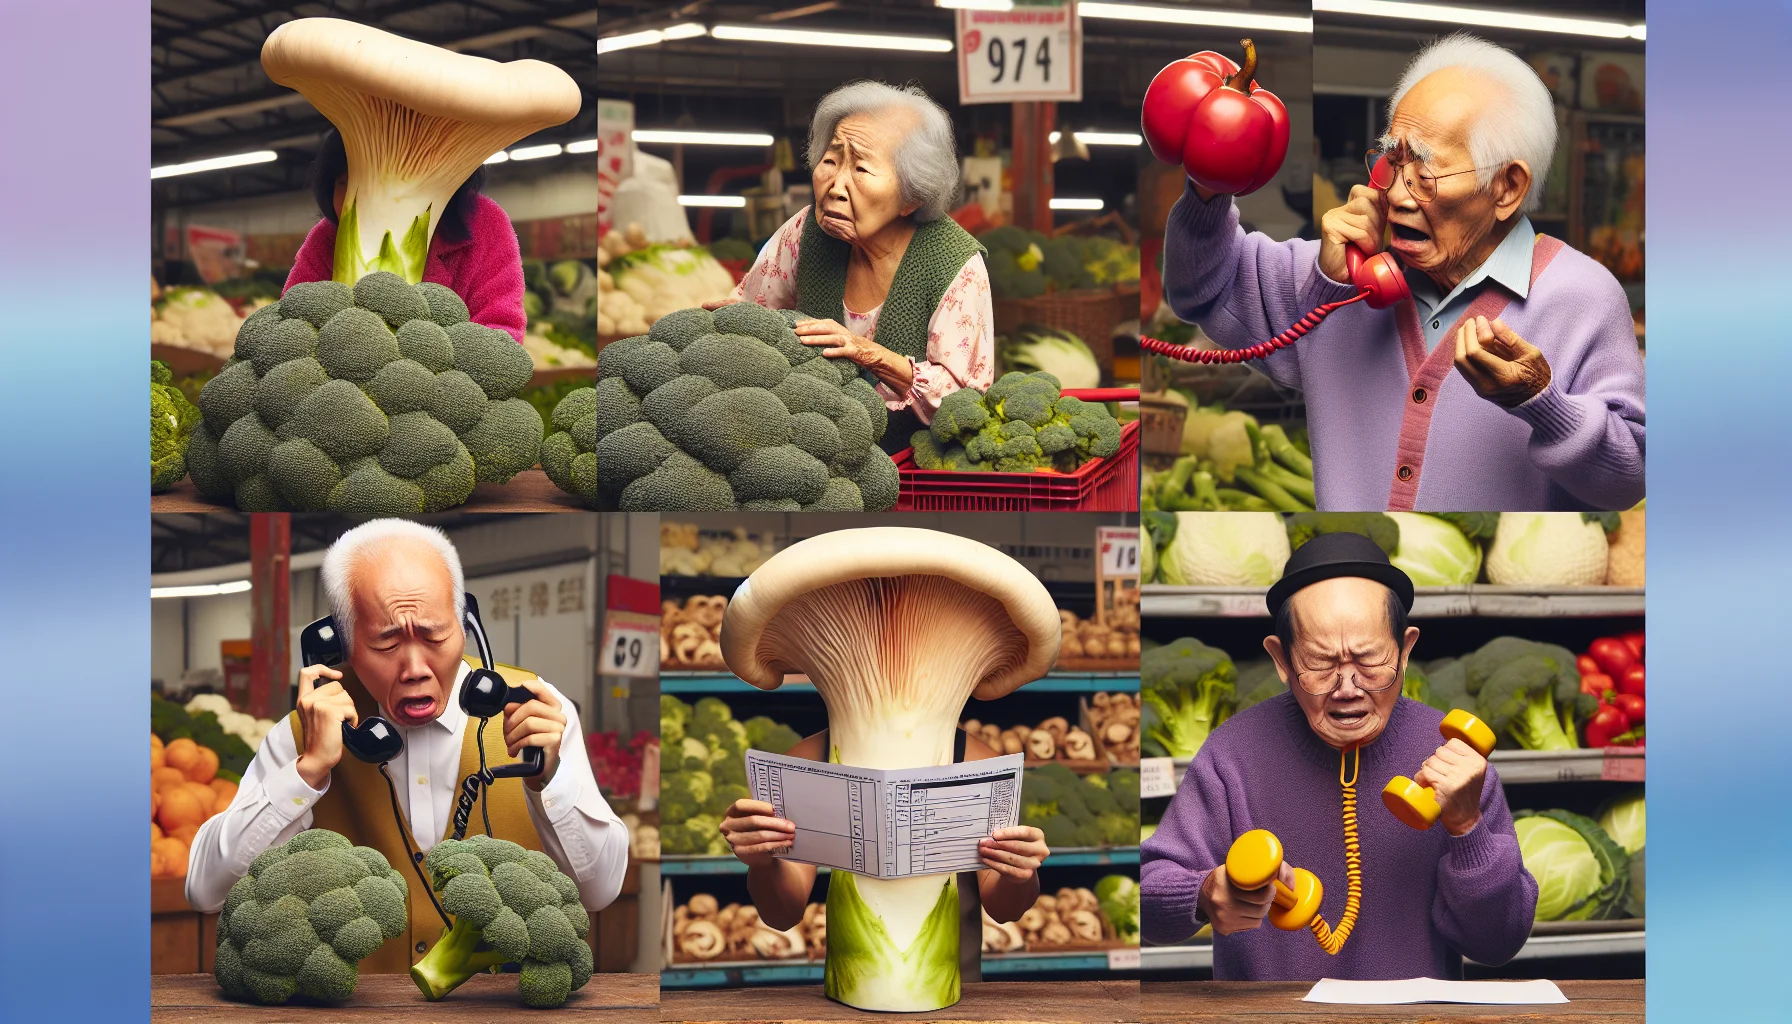 Create a humorous yet realistic image of seniors at a vegetable market. Show a confused elderly Asian woman holding a giant king trumpet mushroom like a telephone. Include a Caucasian old man near a pile of broccoli, trying to use them like dumbbells. To the side, a Middle-Eastern elderly person is reading the food allowance card upside down with a magnifying glass. The situations emphasize the importance of a diverse diet and healthy eating while also highlighting the humor and warmth in their everyday lives.